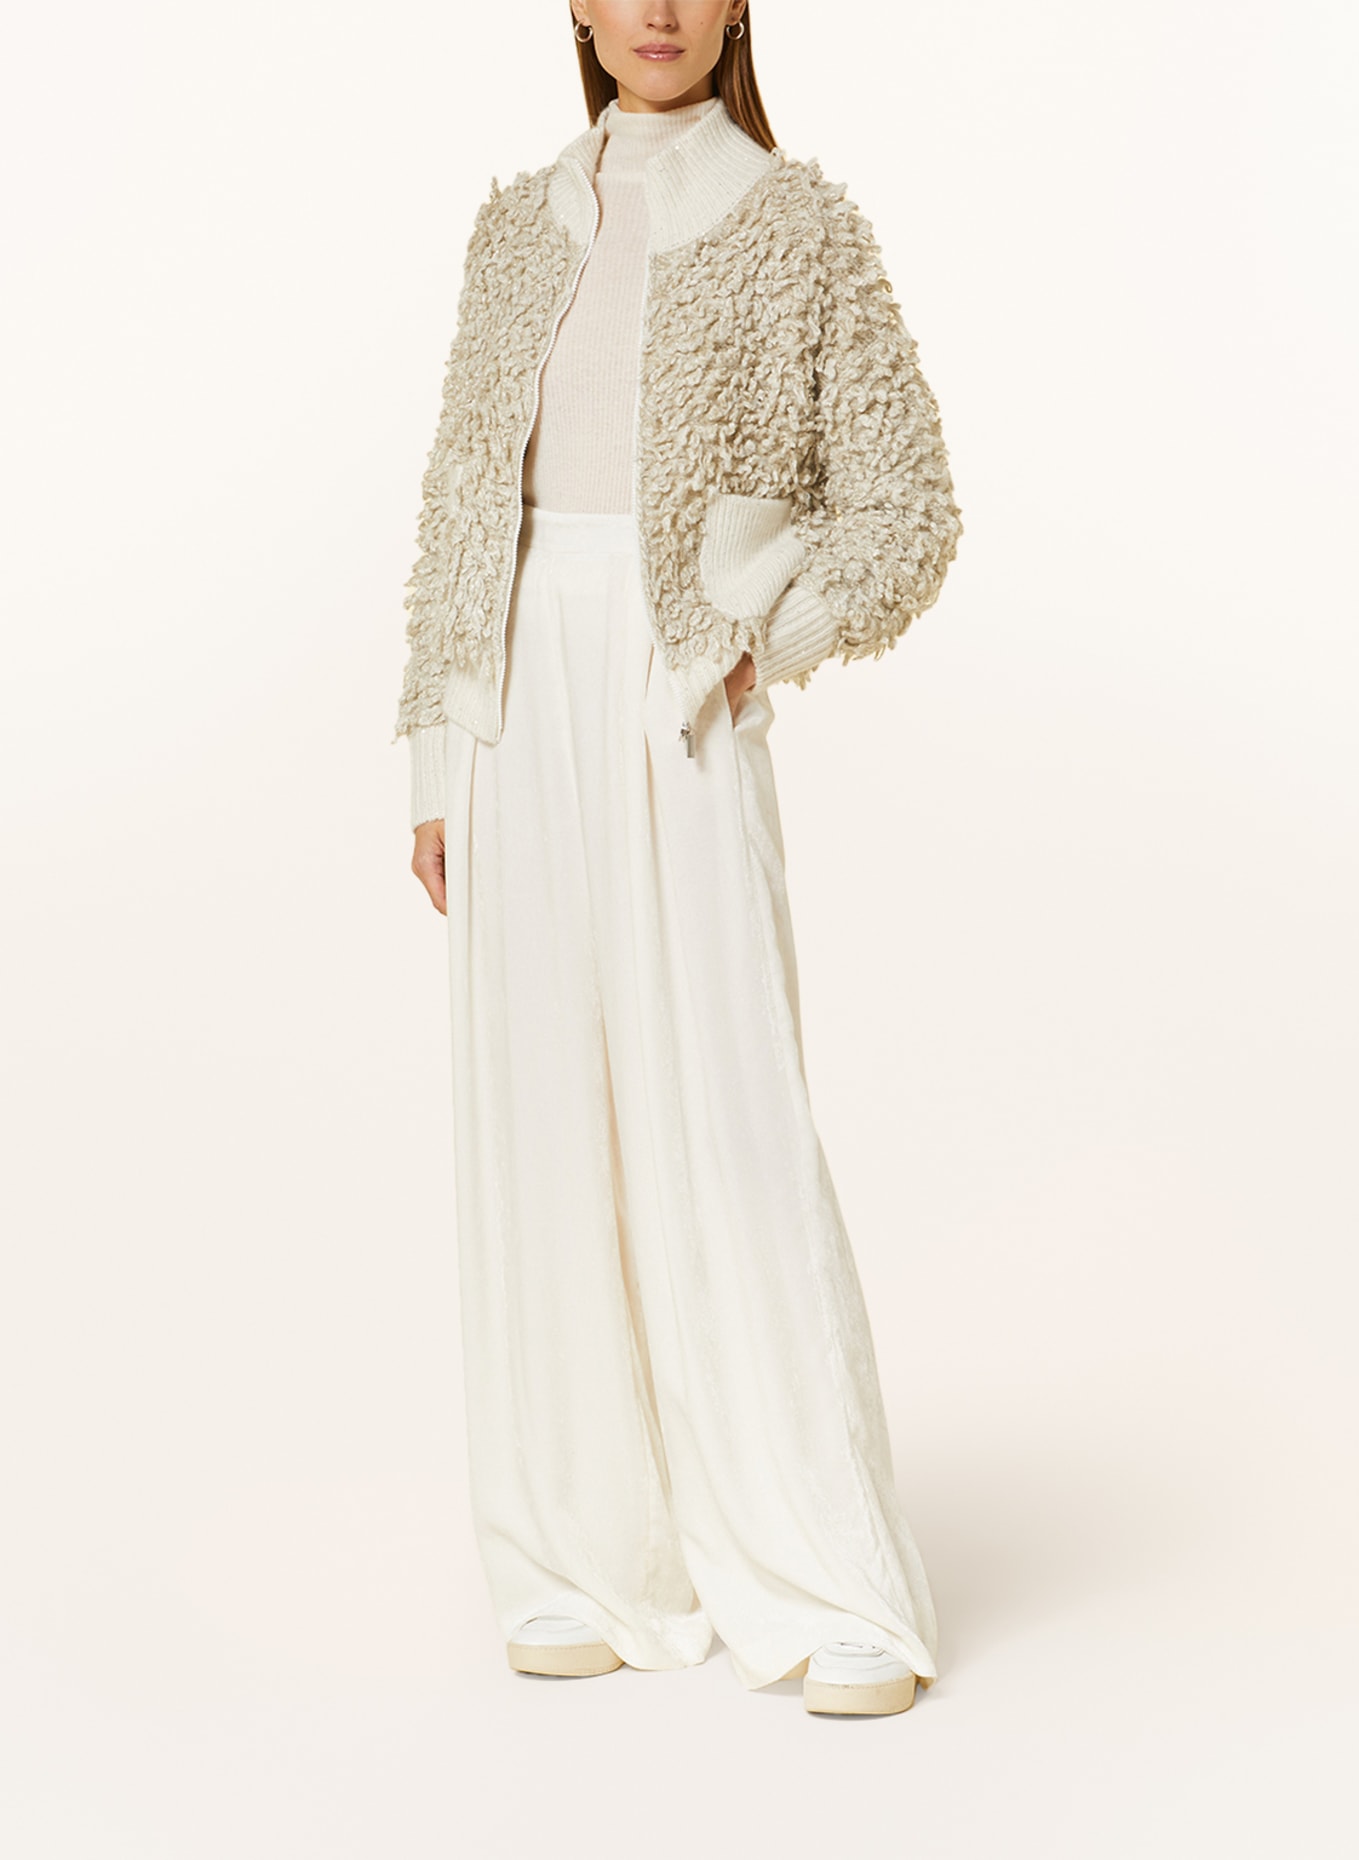 FABIANA FILIPPI Cardigan with glitter thread and Sequins, Color: WHITE/ LIGHT GRAY/ SILVER (Image 2)